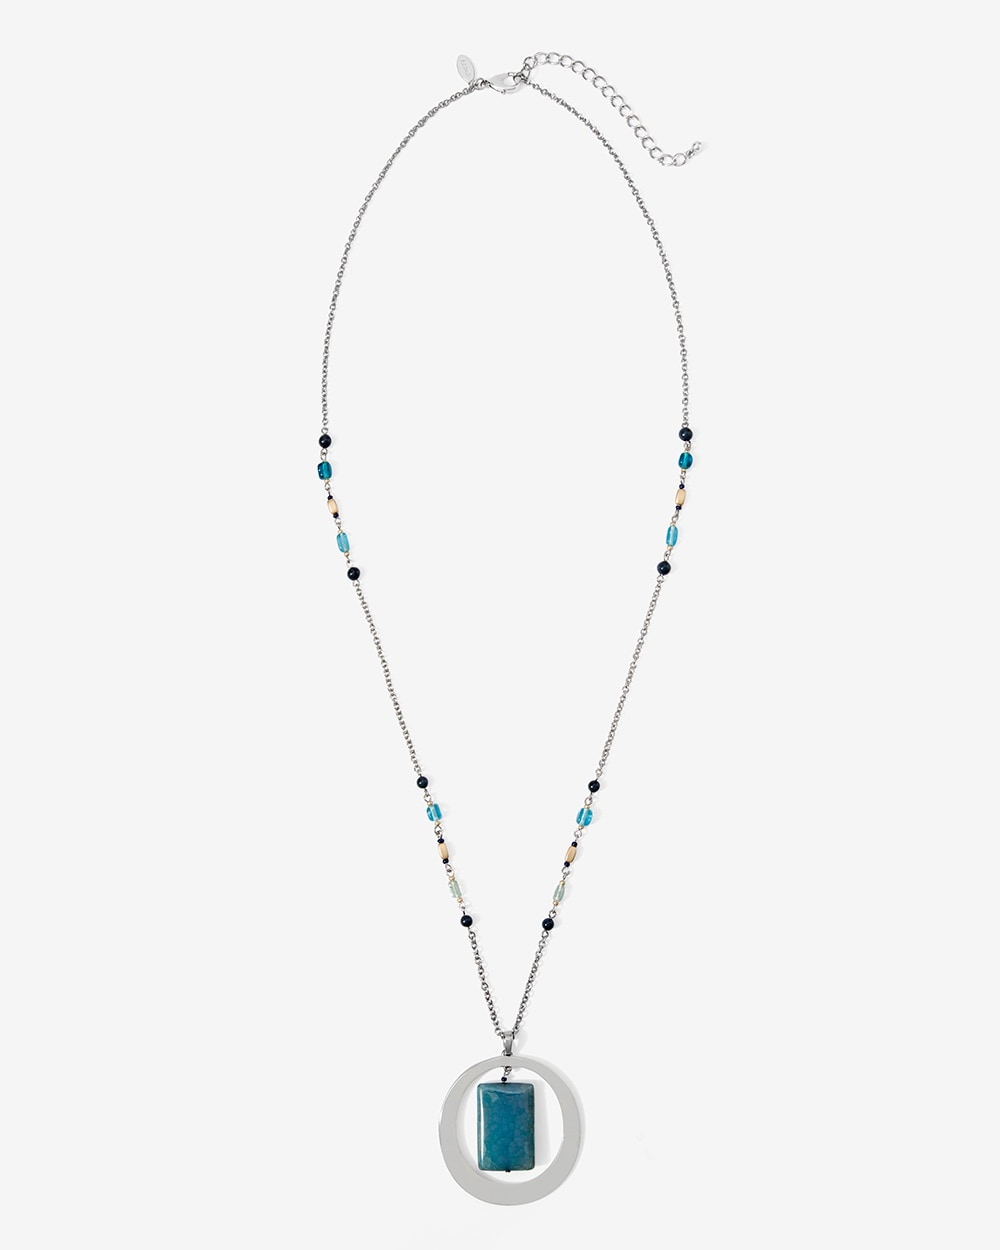 Floating Stones Necklace